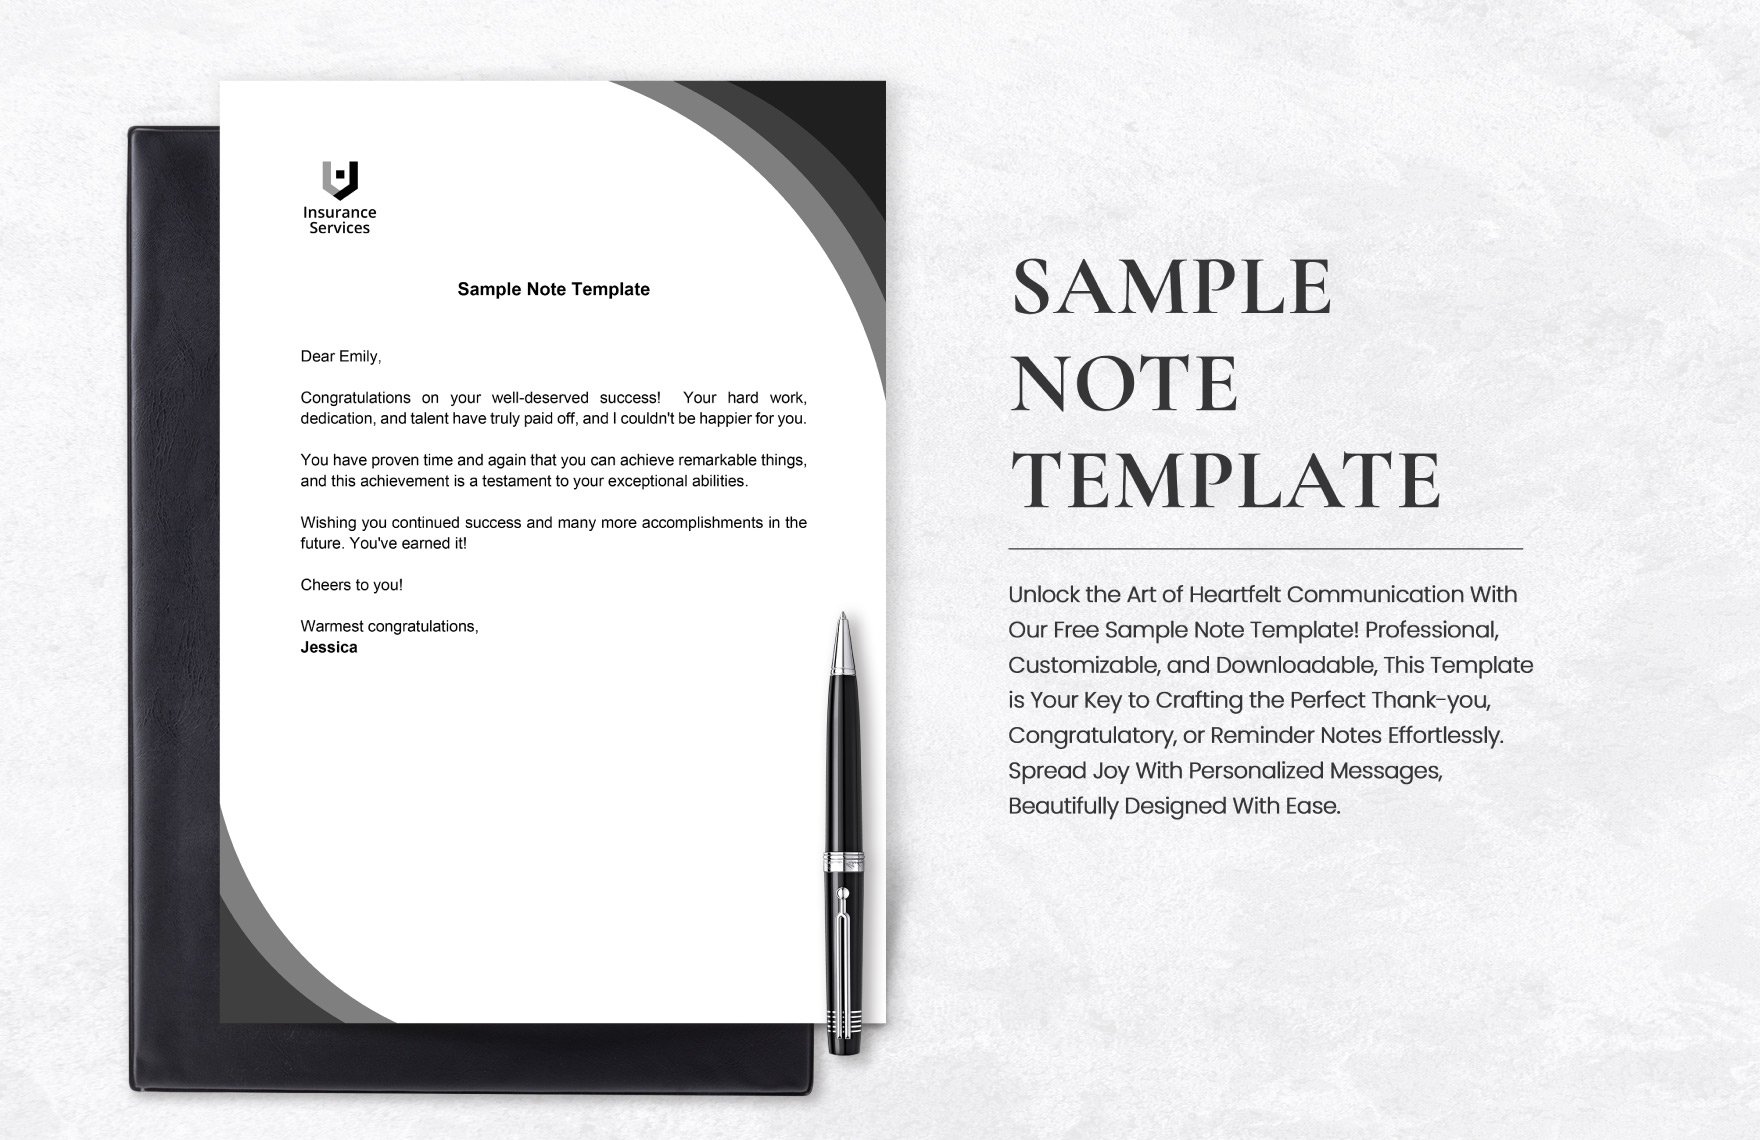 Free Sample Note Template